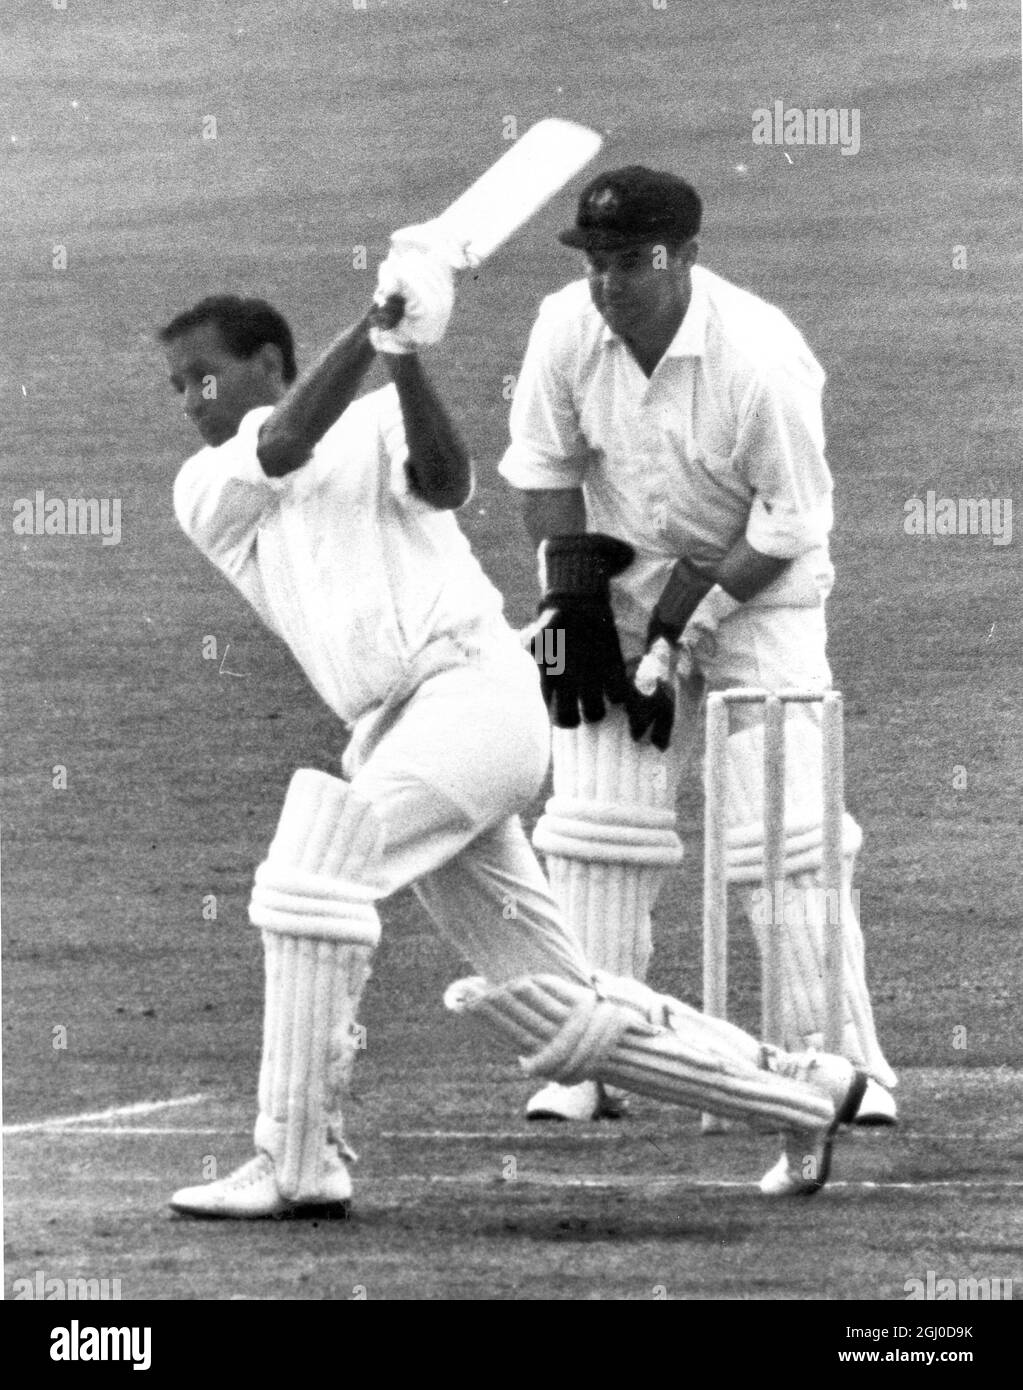 England v Australia Basil D'Oliveira hitting out at a ball from Bob Cowper during England's second innings in the first Test at Old Trafford Barry Jarman is the wicket keeper 11th June 1968 Stock Photo